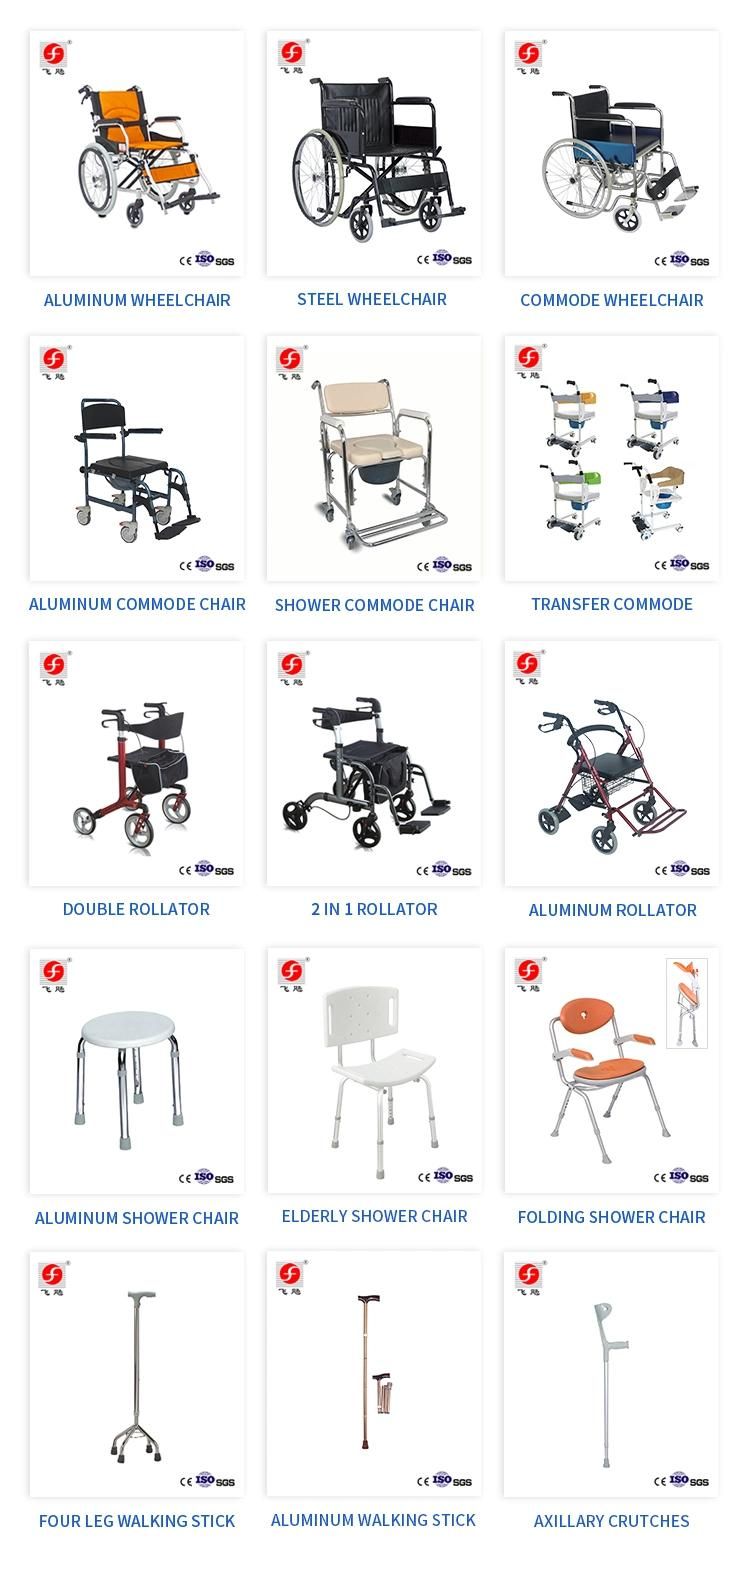 High Quality Aluminum Folding Commode Shower Chair with Wheels for The Elderly